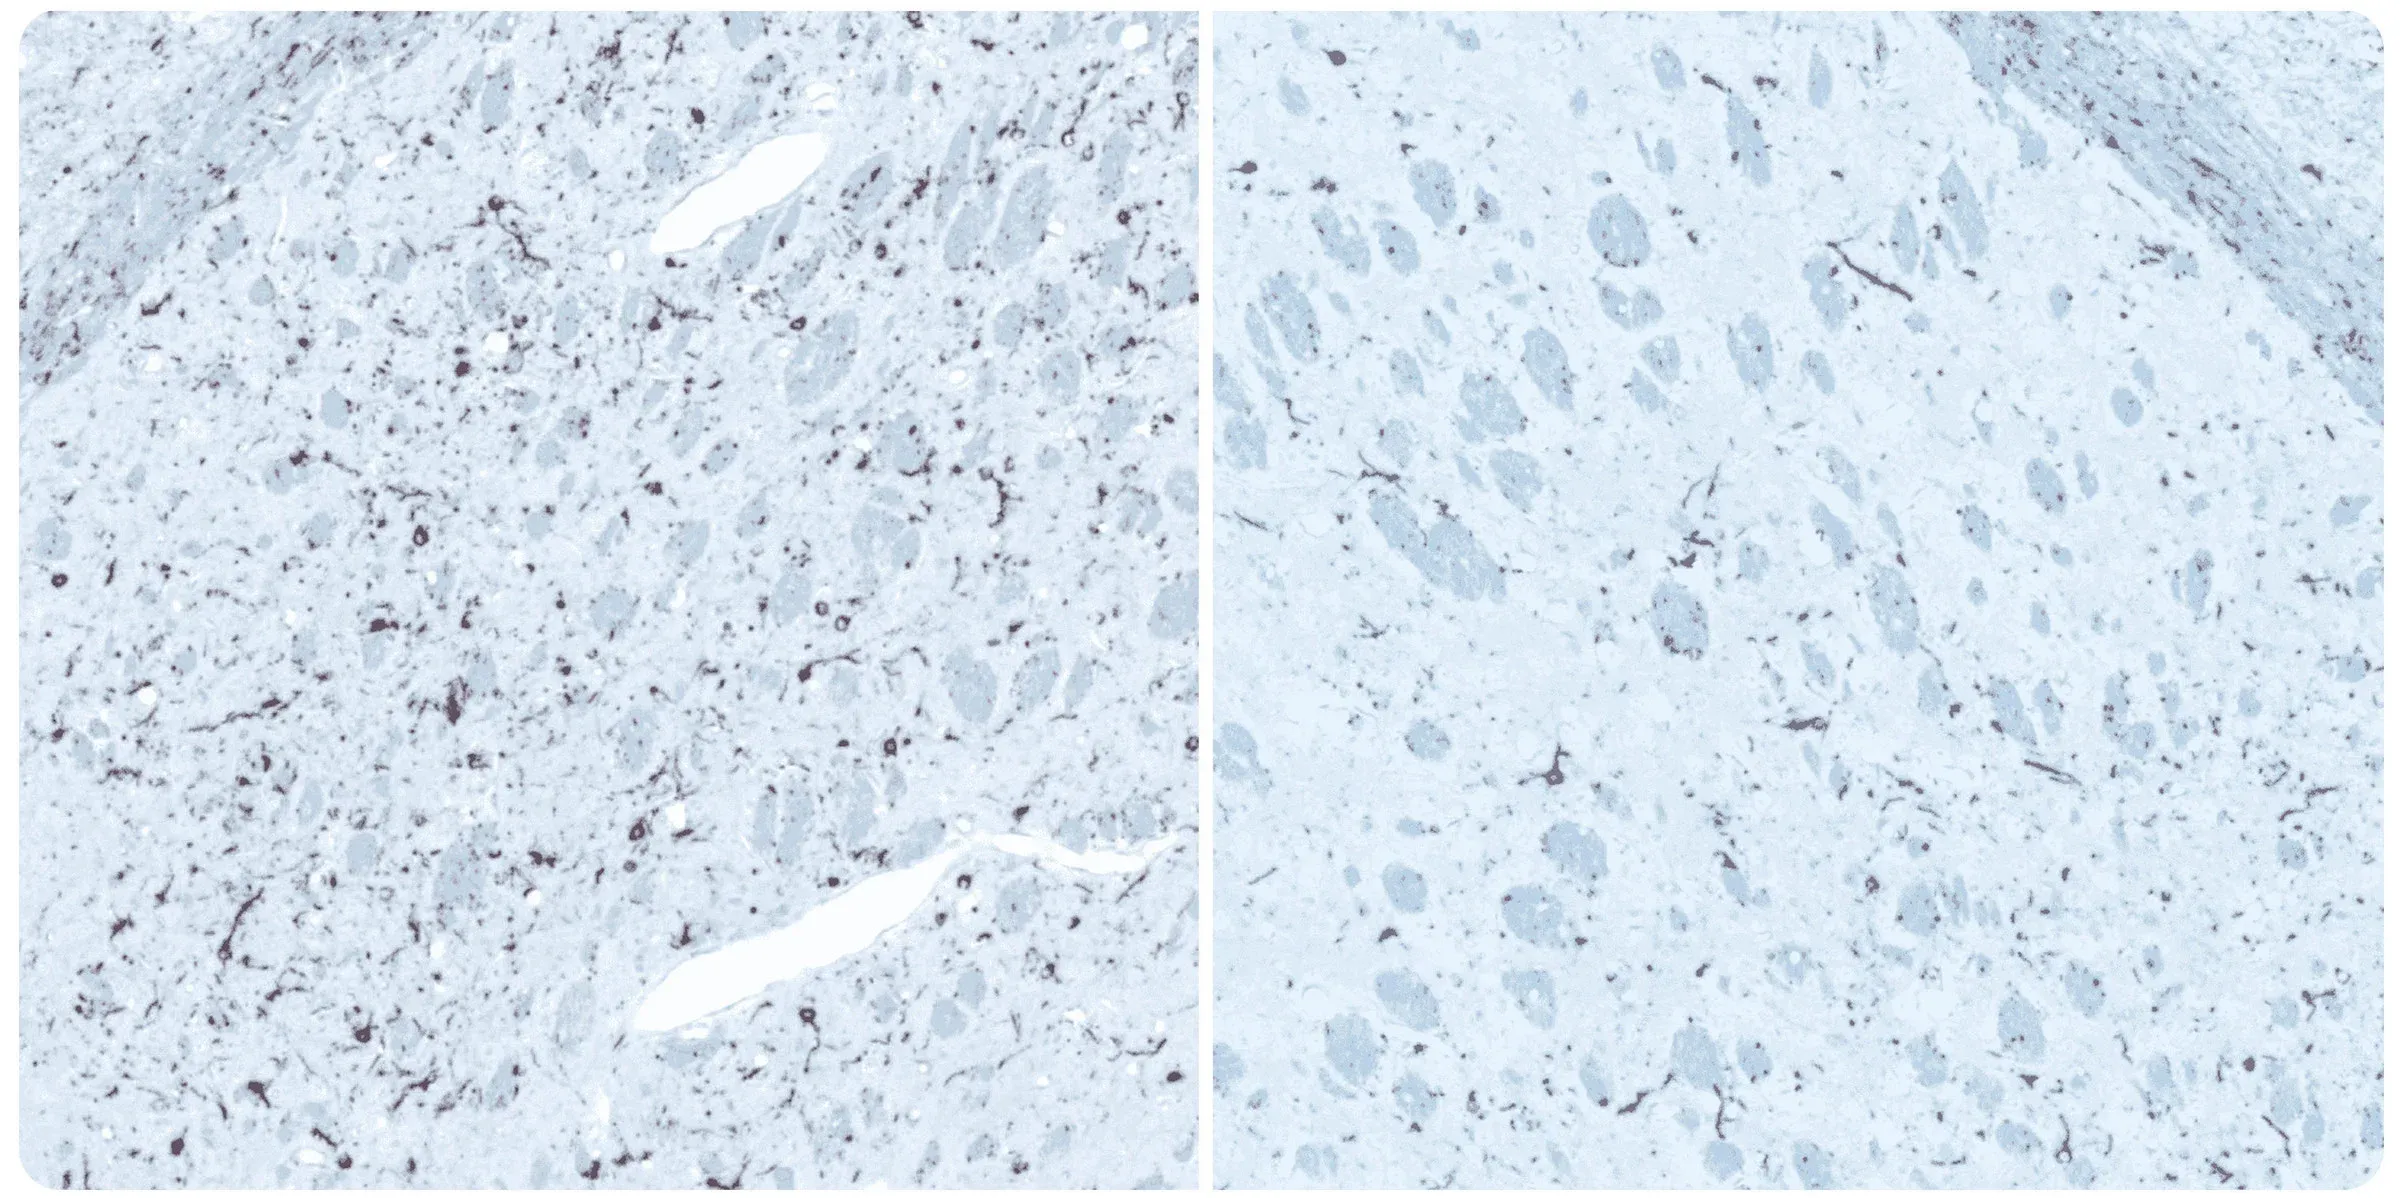 Immunohistochemistry (IHC) staining of brain tissue sections to reveal alpha synuclein burden in anterior olfactory nucleus (AON), associated with Parkinson's Disease (PD)